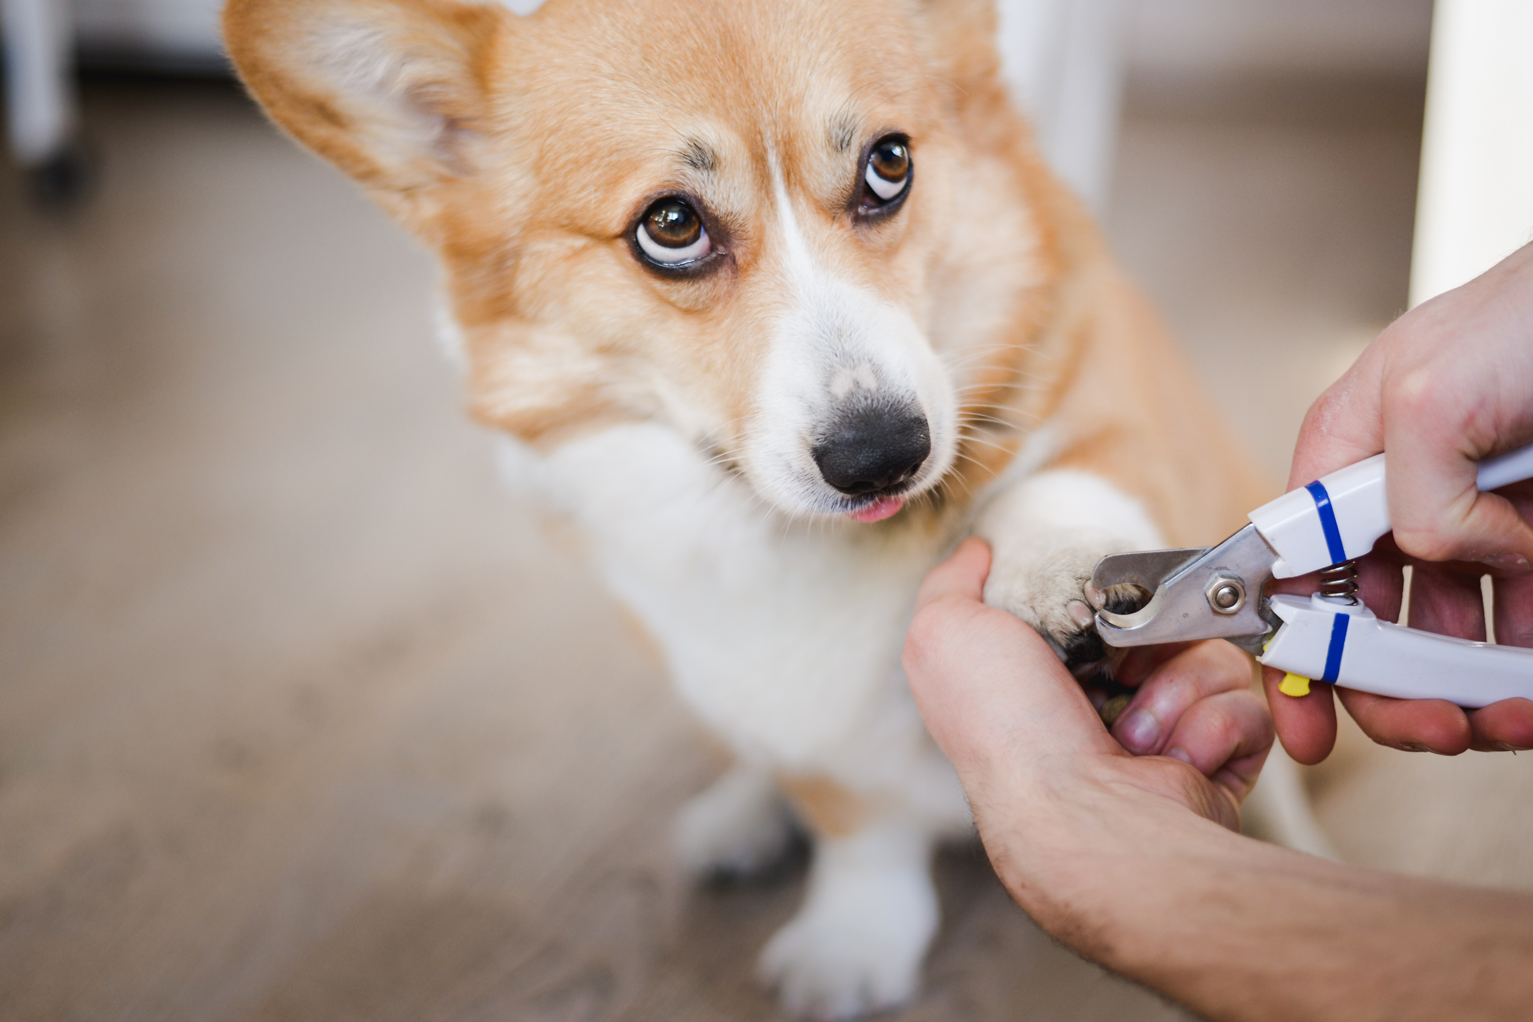 Should You Use a Nail Grinder on Your Dog's Nails? - I Love My Chi